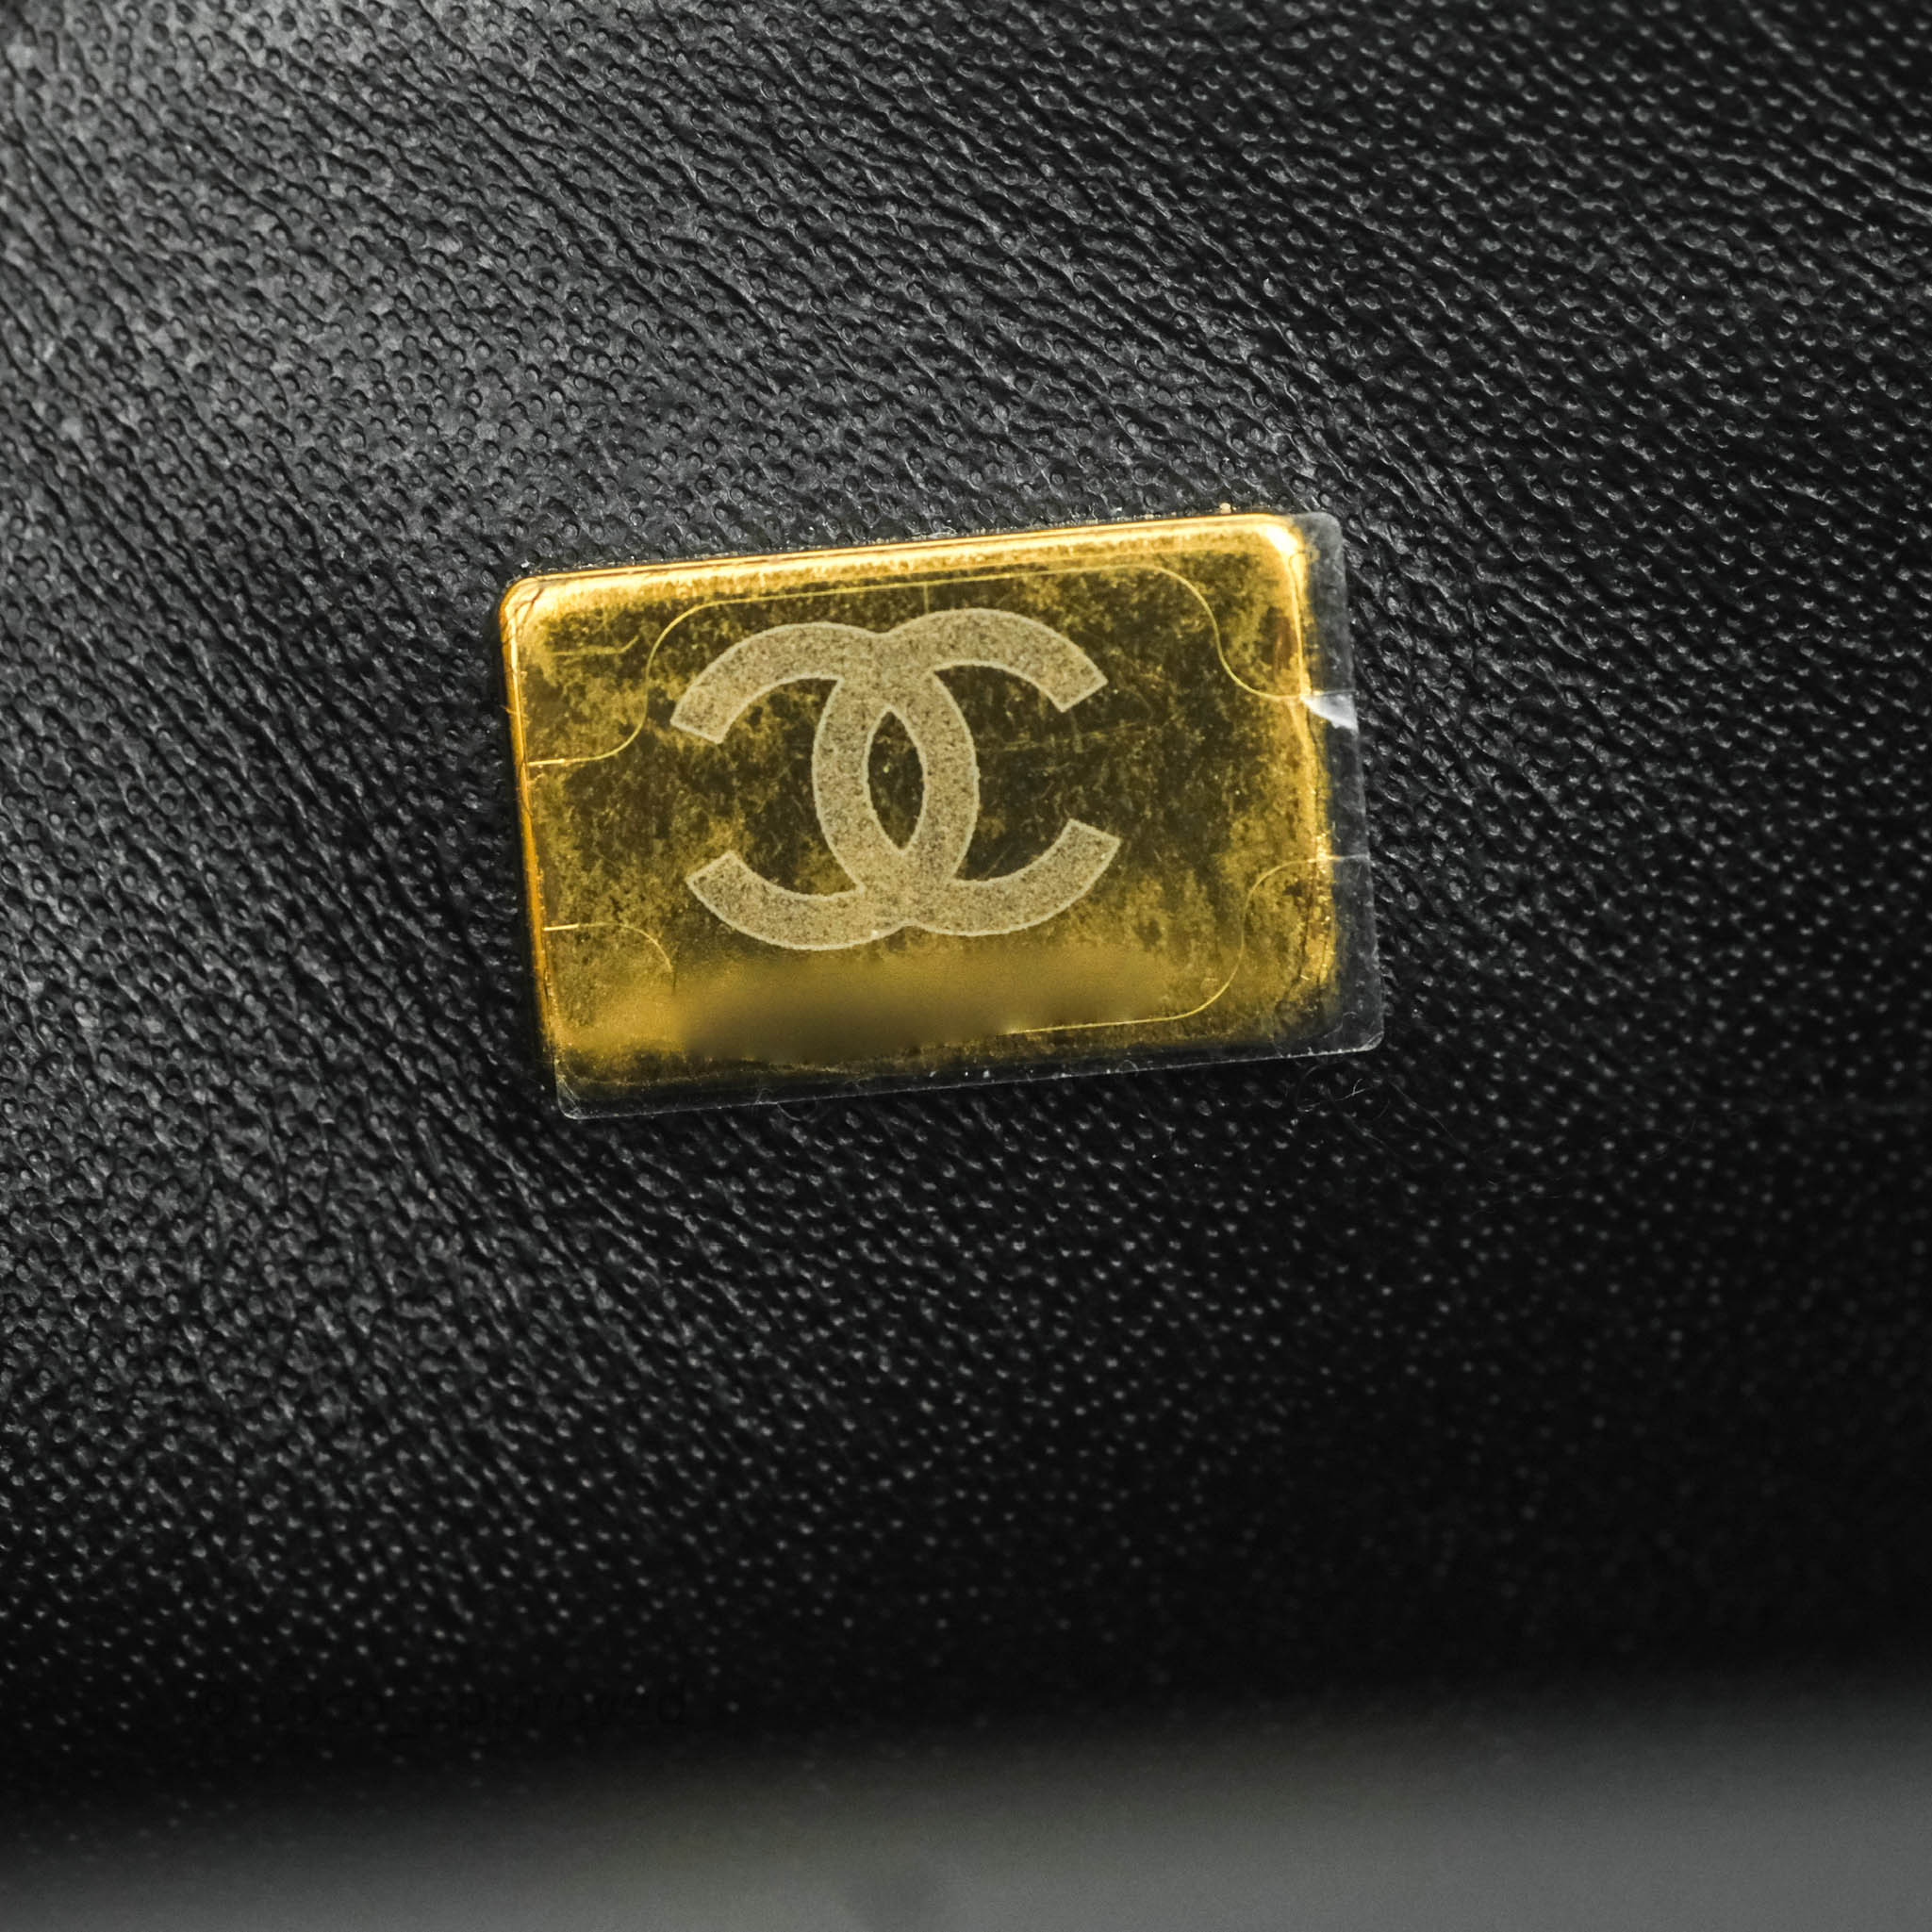 CHANEL Caviar Leather Bags & Handbags for Women, Authenticity Guaranteed